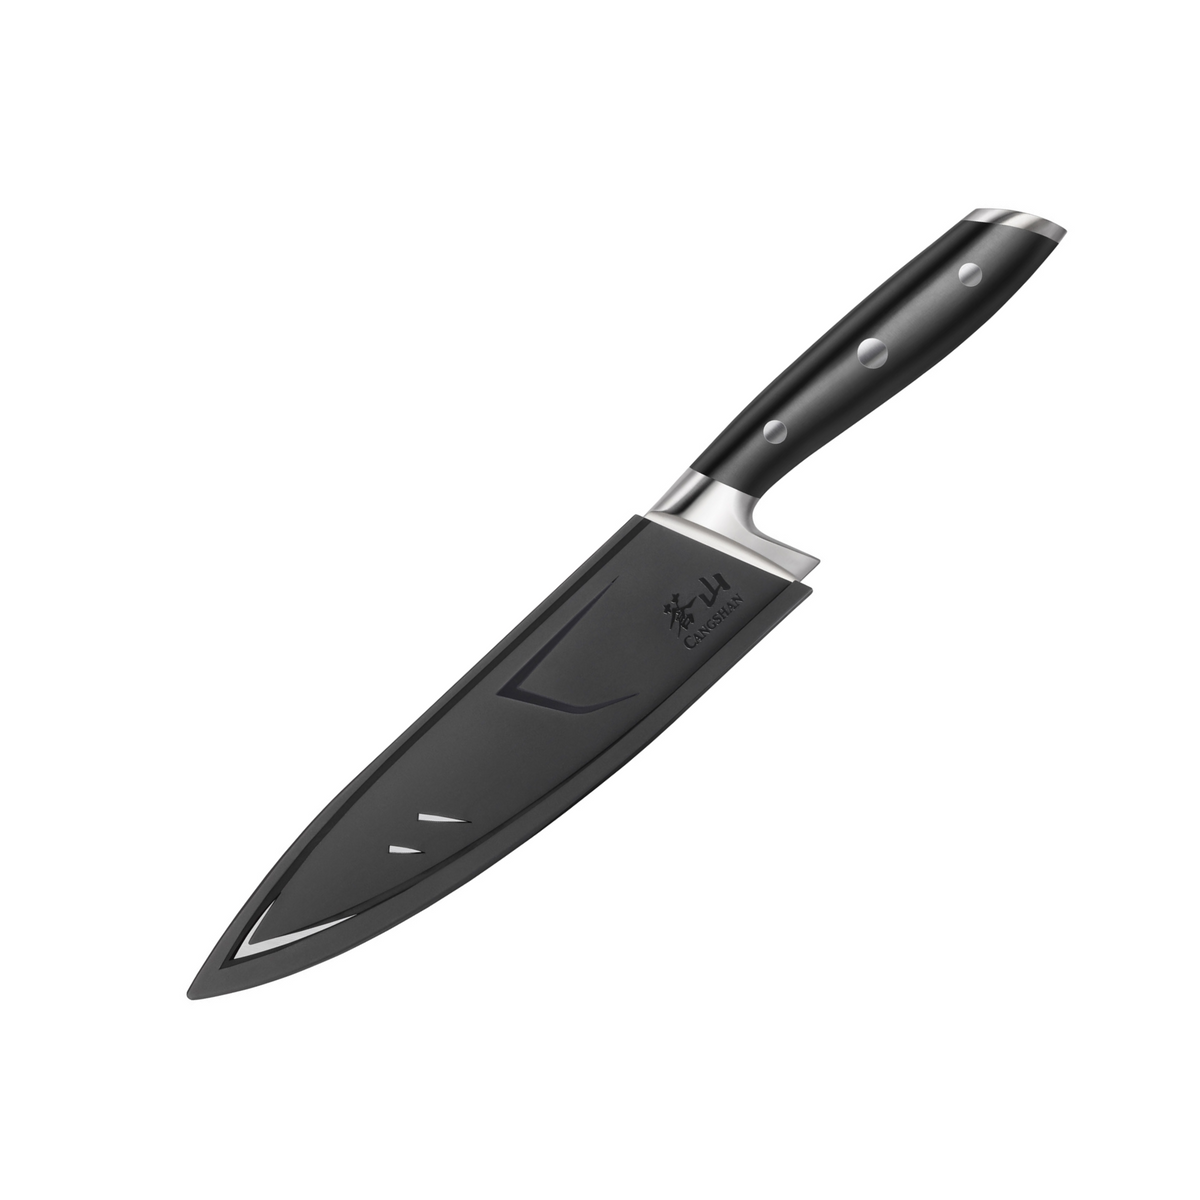 Cangshan Alps Series 502735 German Steel Forged 8-Inch Chef's Knife with Sheath, Black